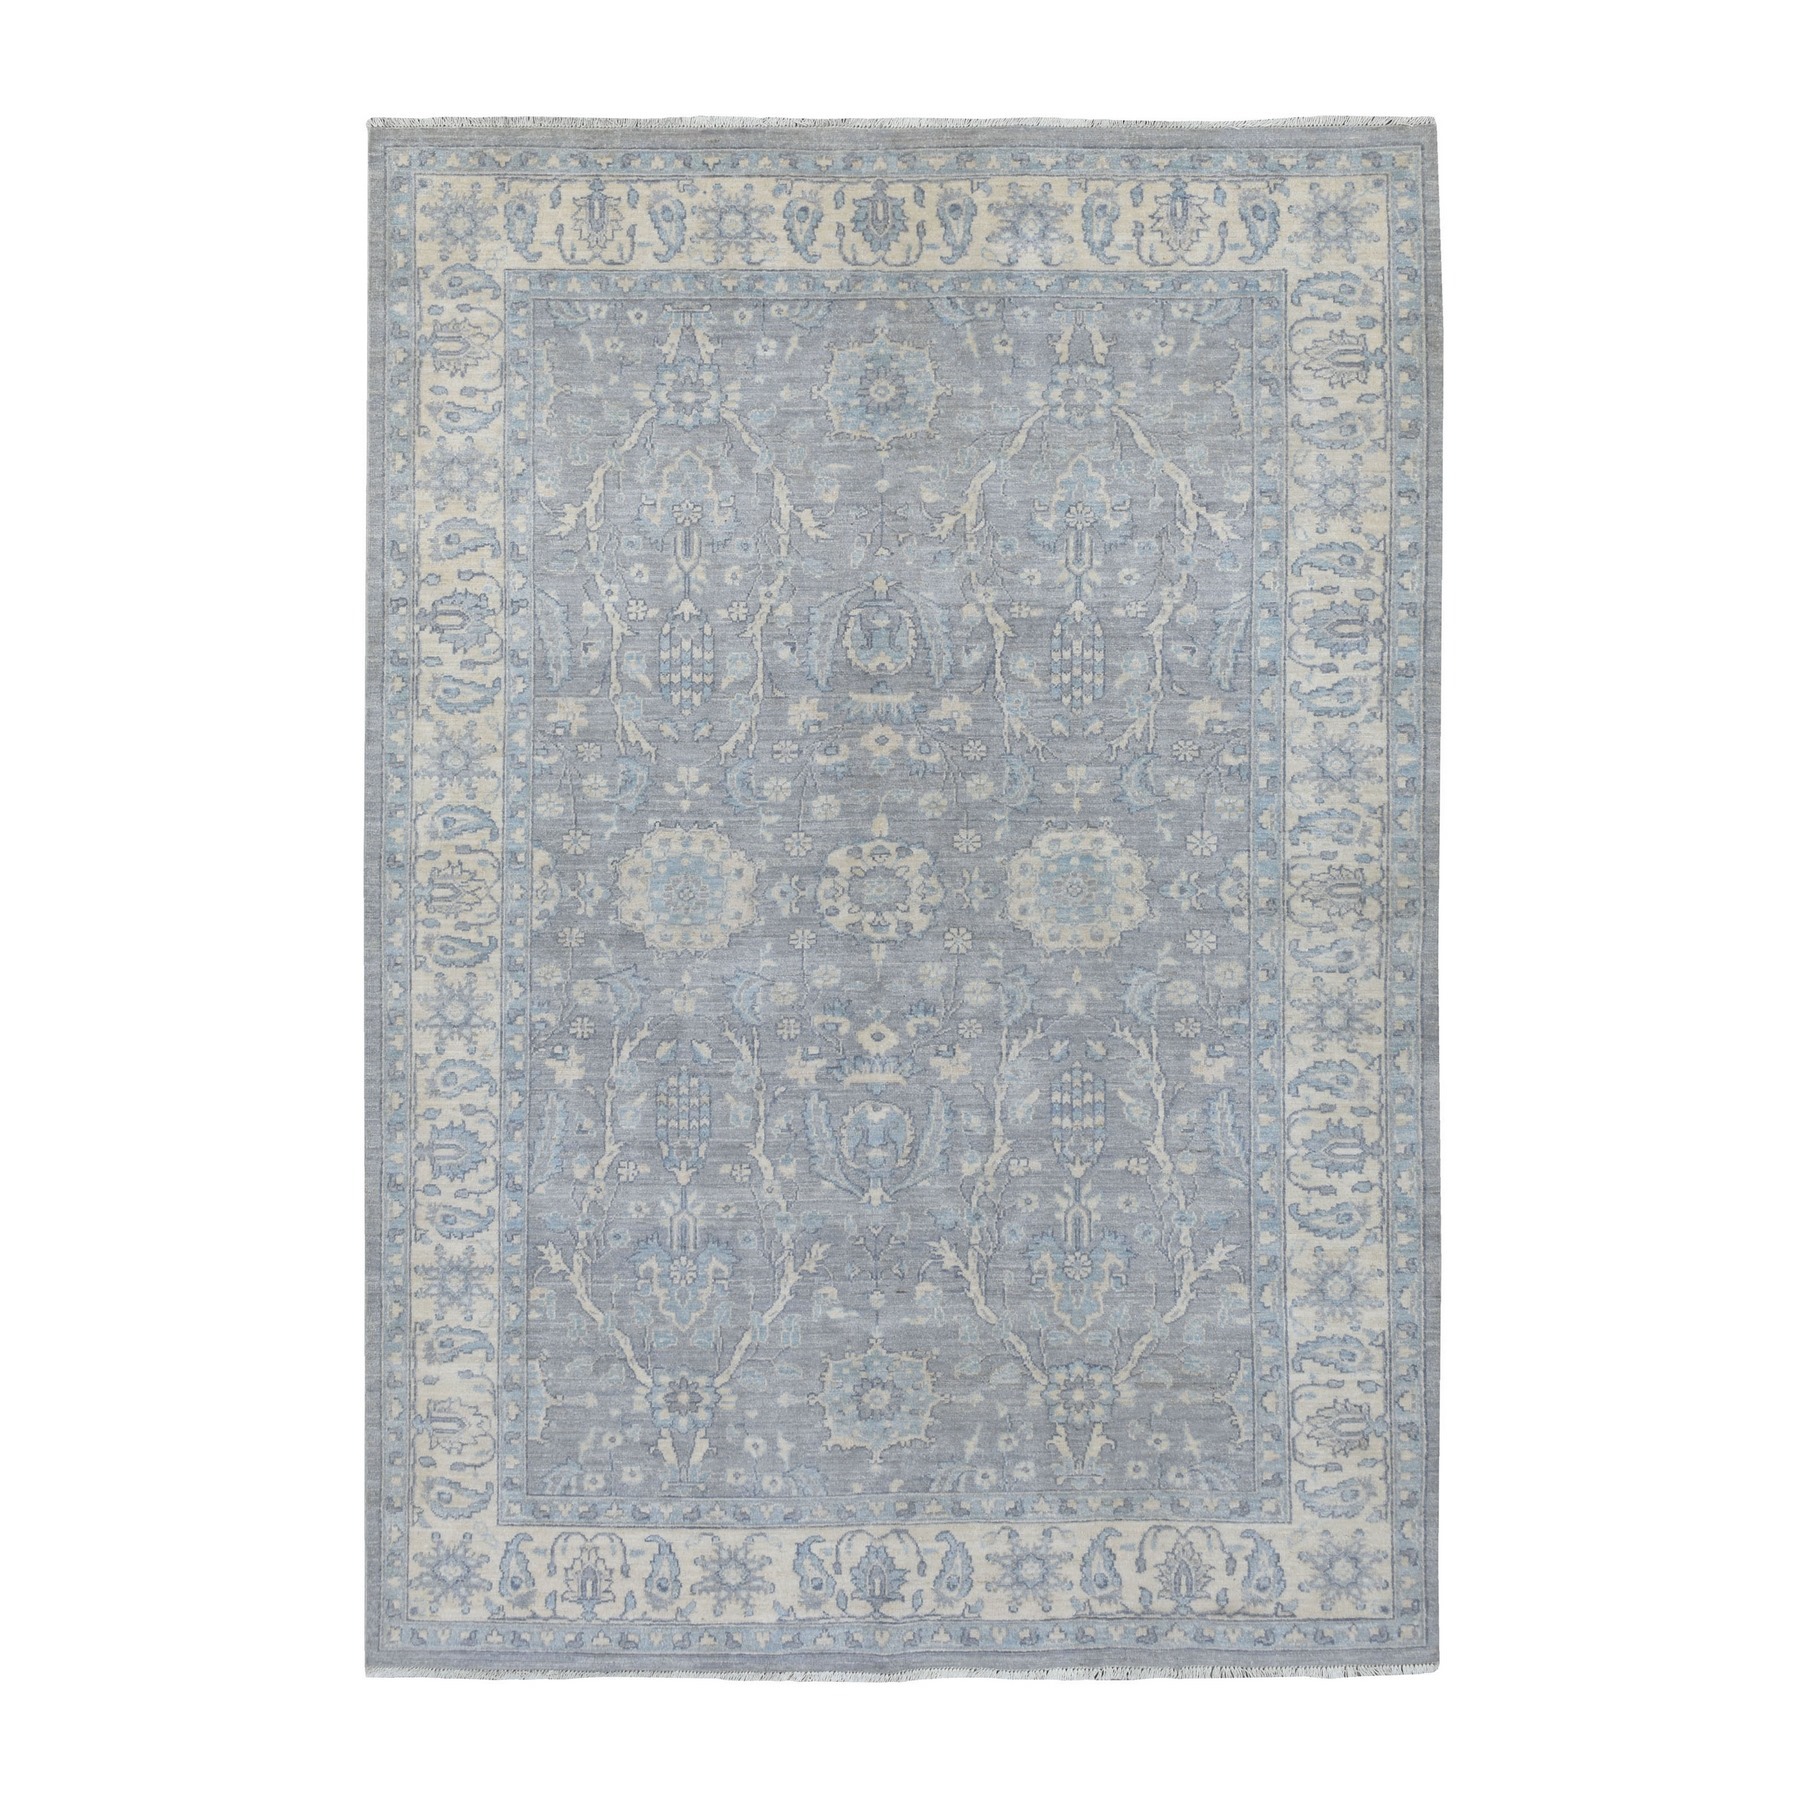 Agra And Turkish Collection Hand Knotted Grey Rug No: 1134928